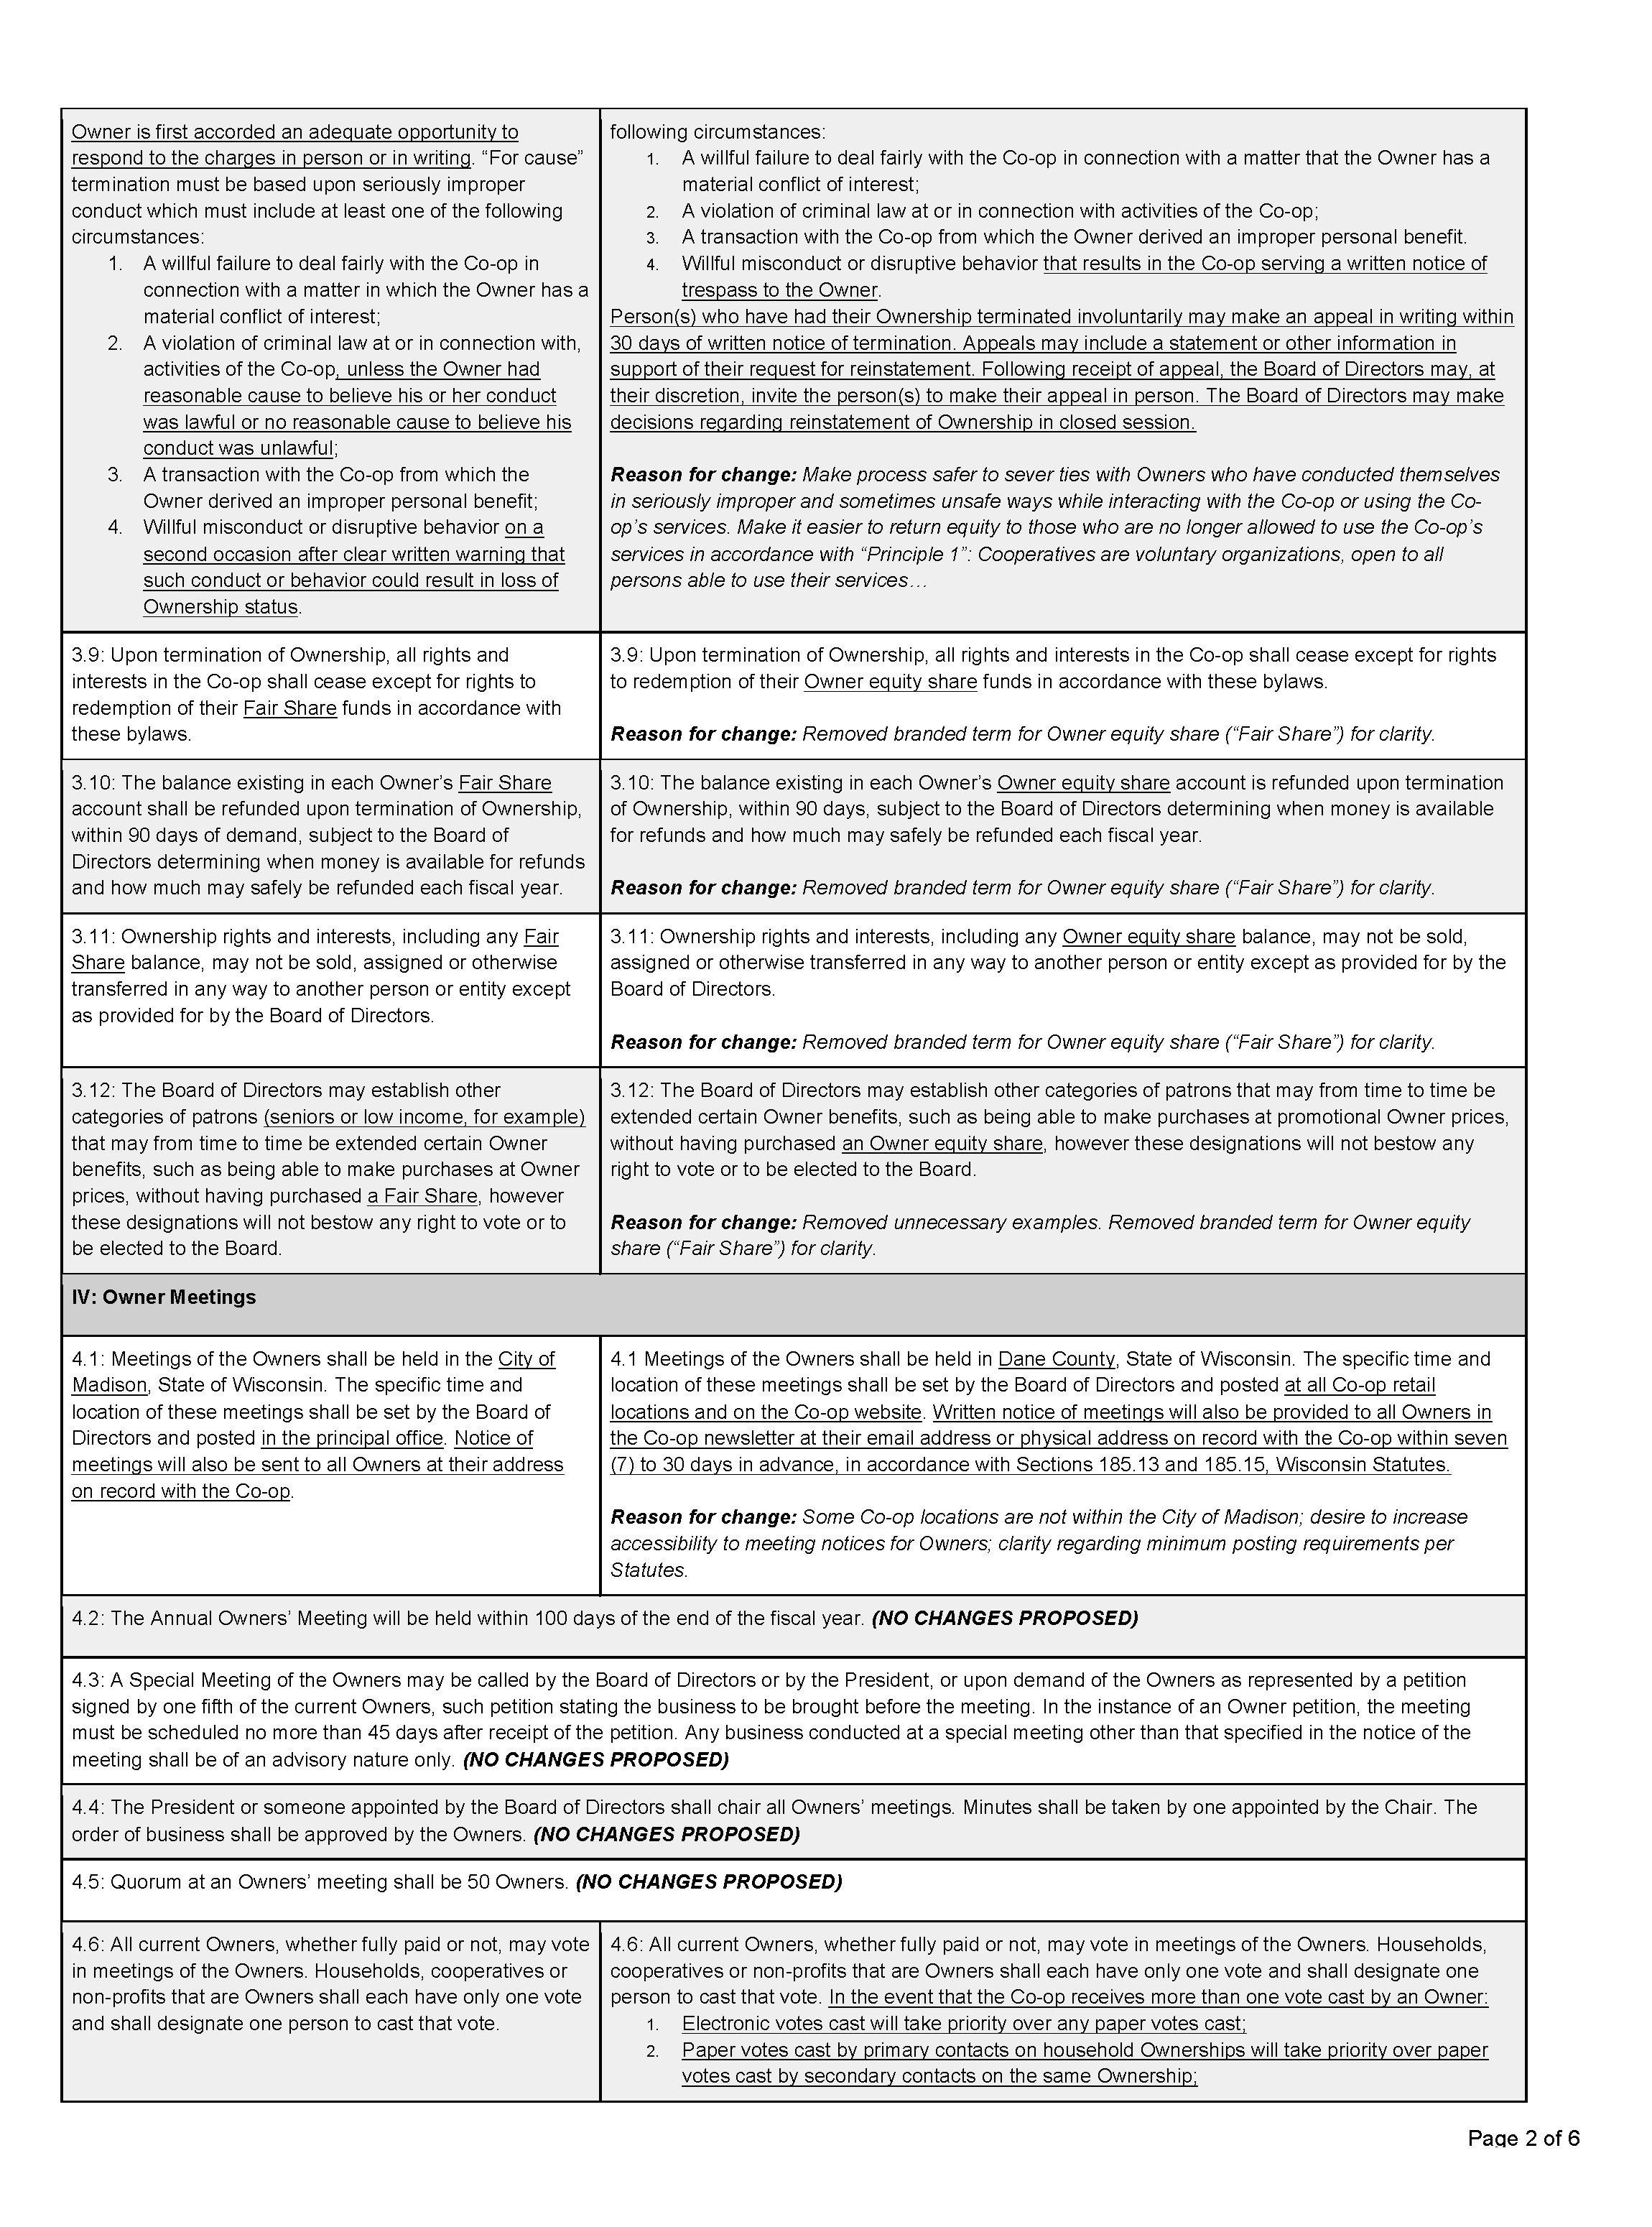 2020 Bylaws Review for Ballot Consideration Page 3